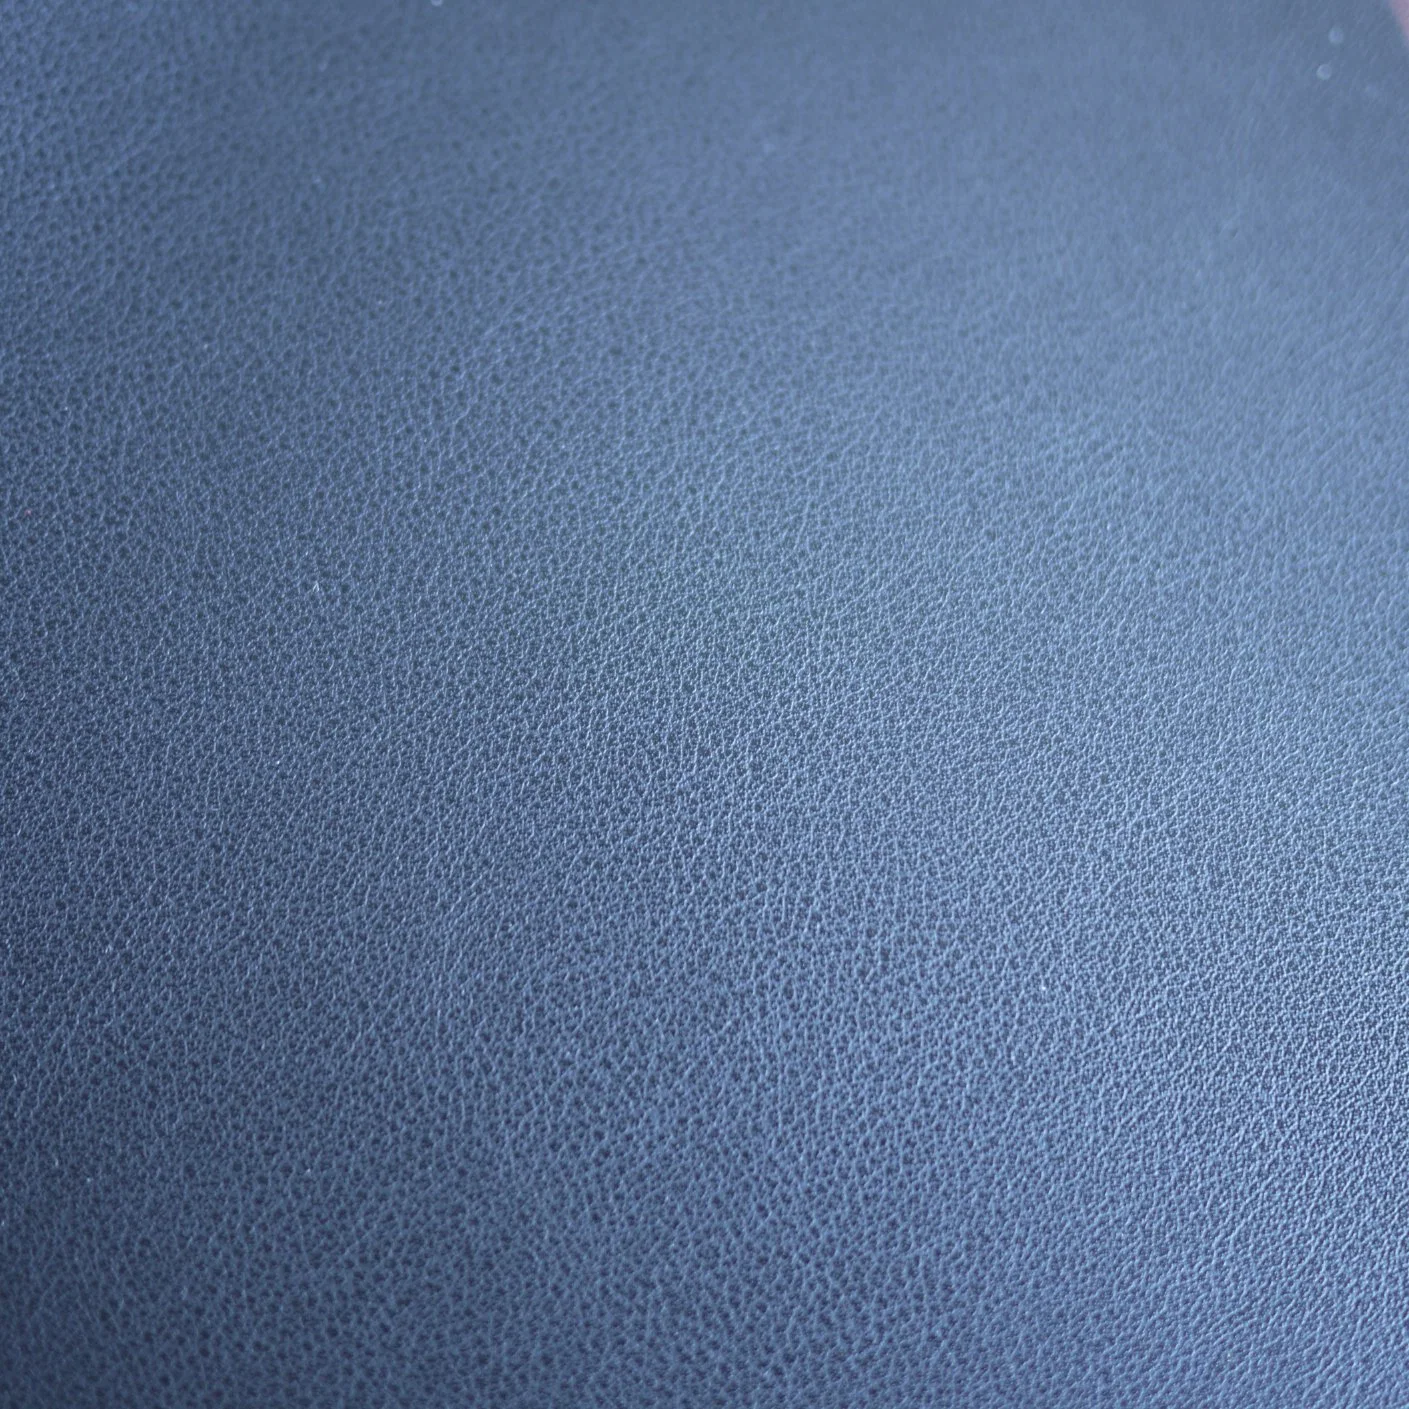 Finished PVC Wholesale Coated Leather for Furniture Textile